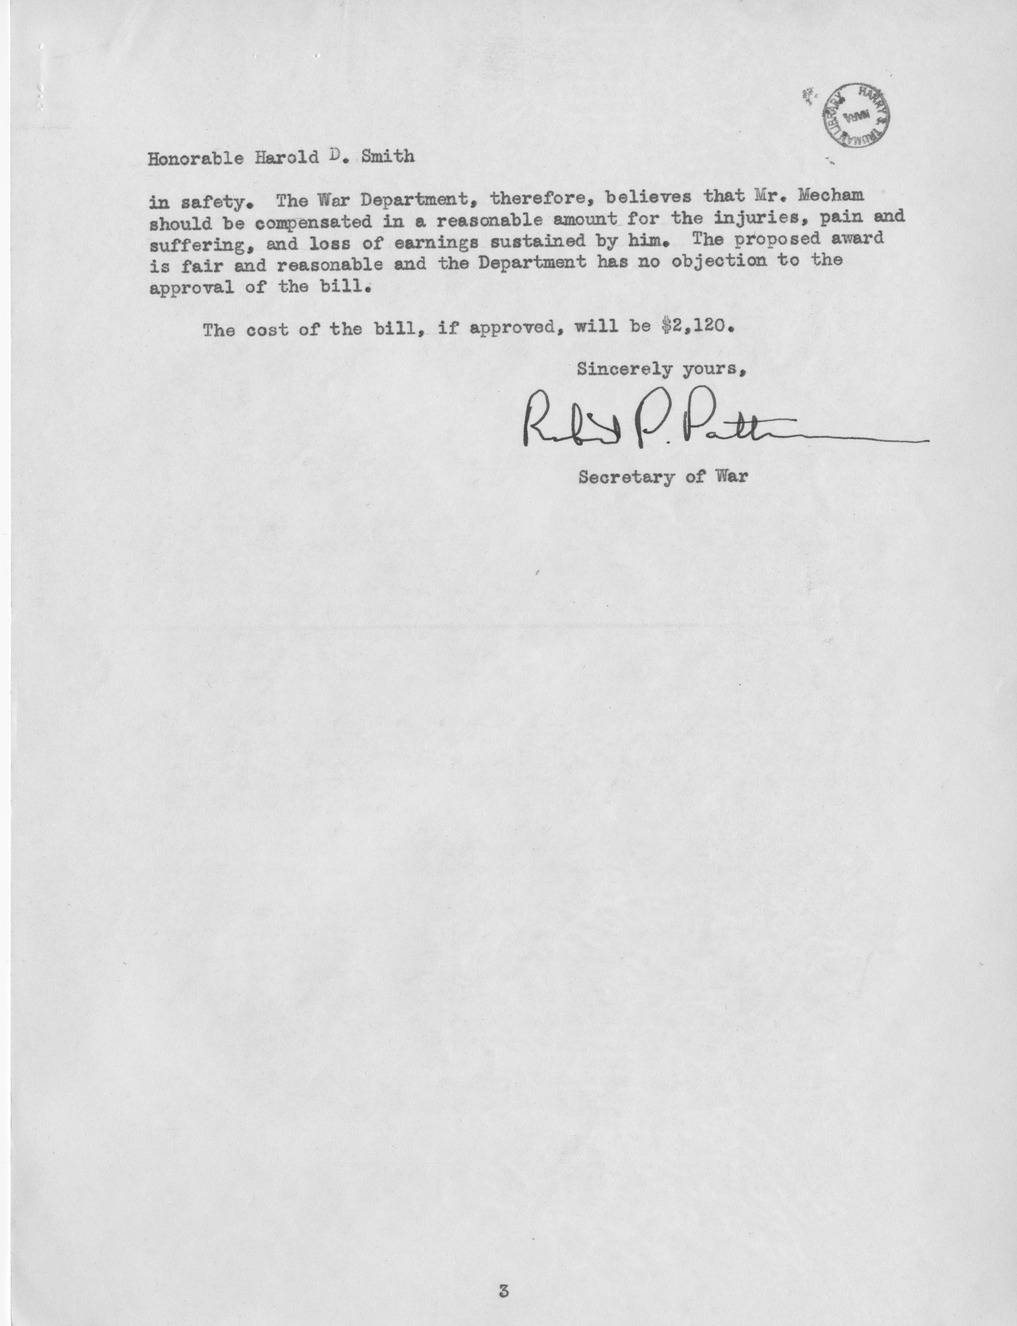 Memorandum from Frederick J. Bailey to M. C. Latta, H. R. 2289, For the Relief of Arnold Mecham, with Attachments